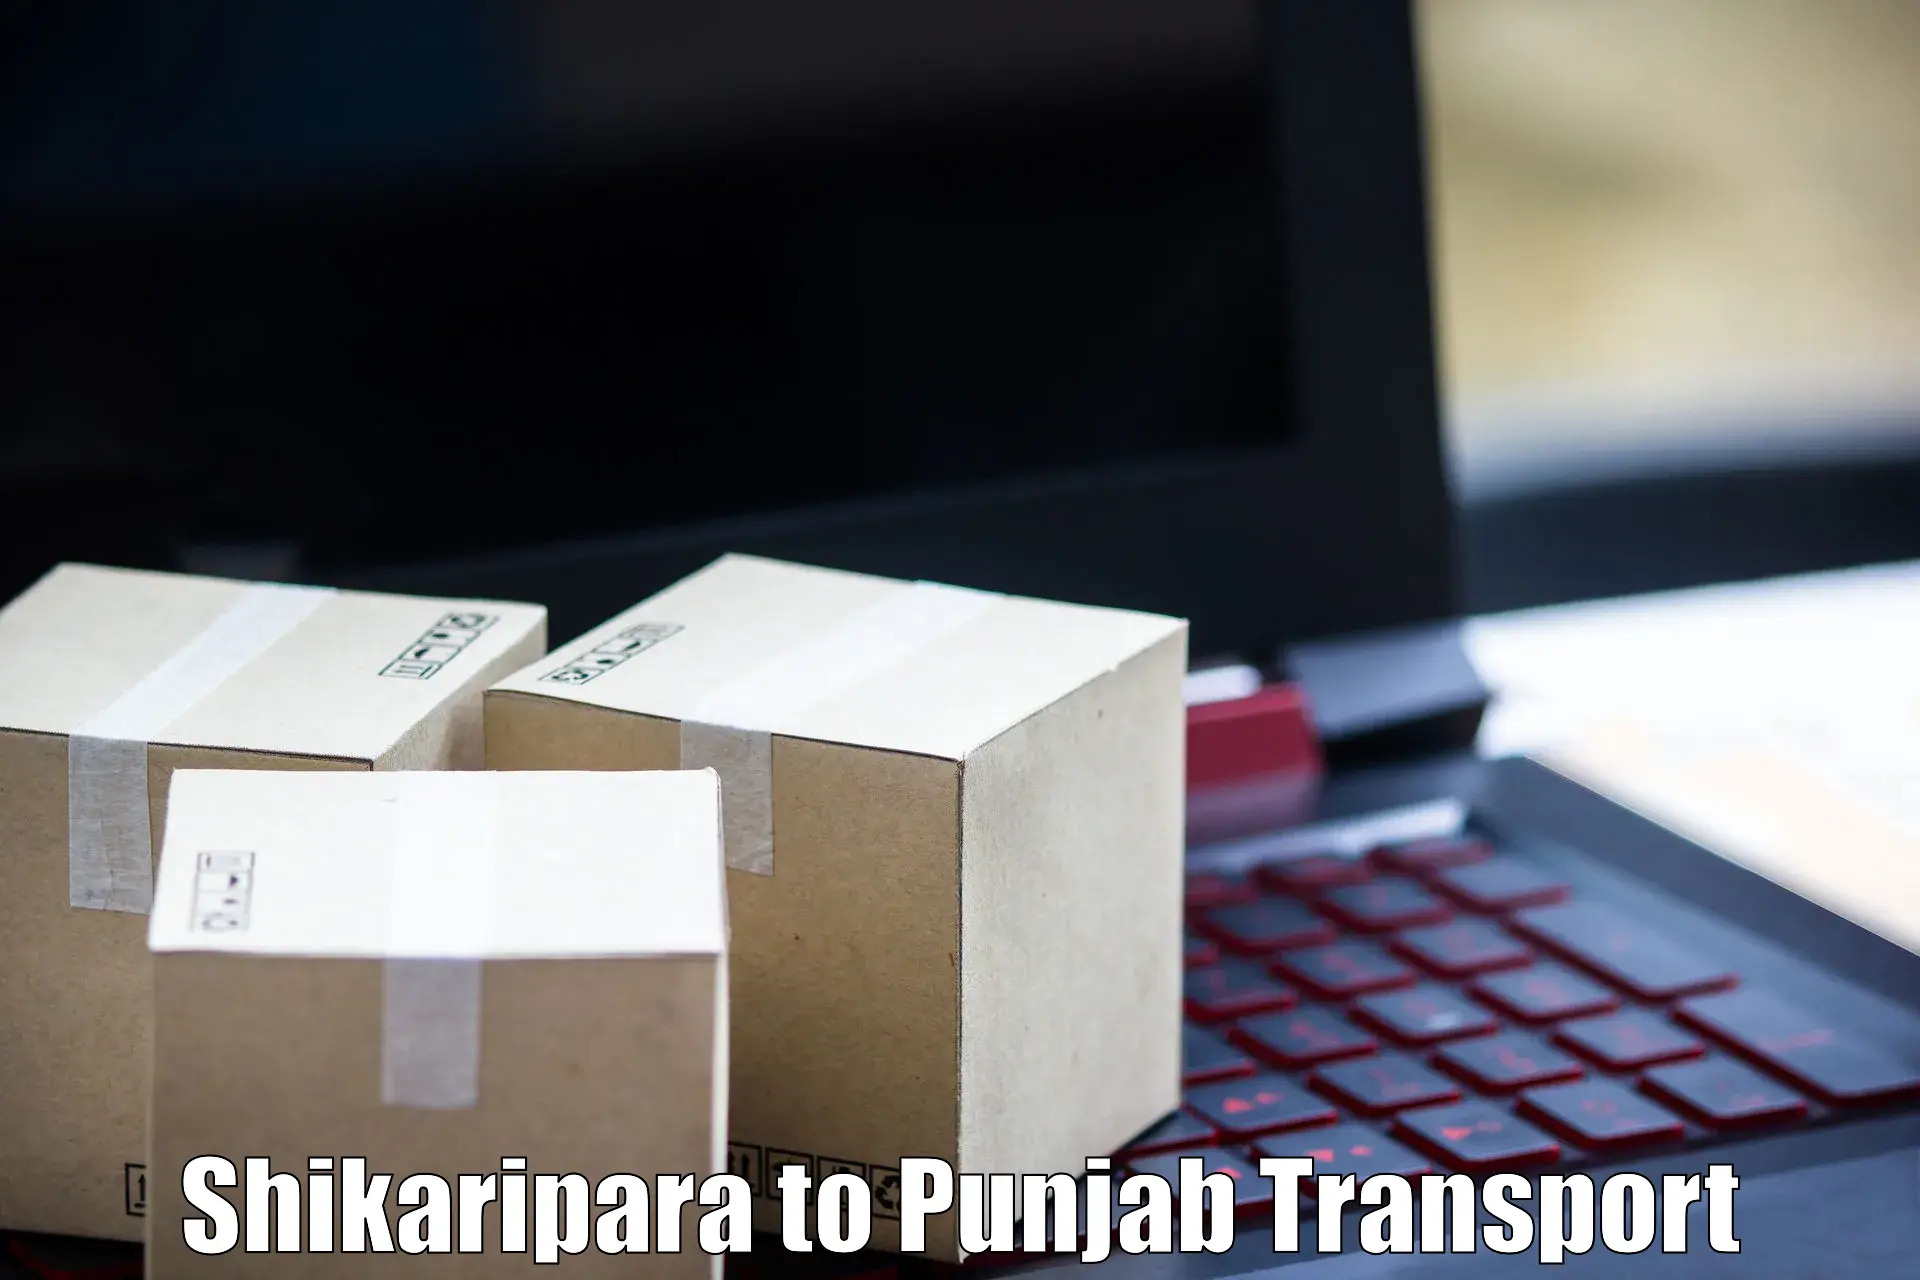 Nearby transport service Shikaripara to Sultanpur Lodhi